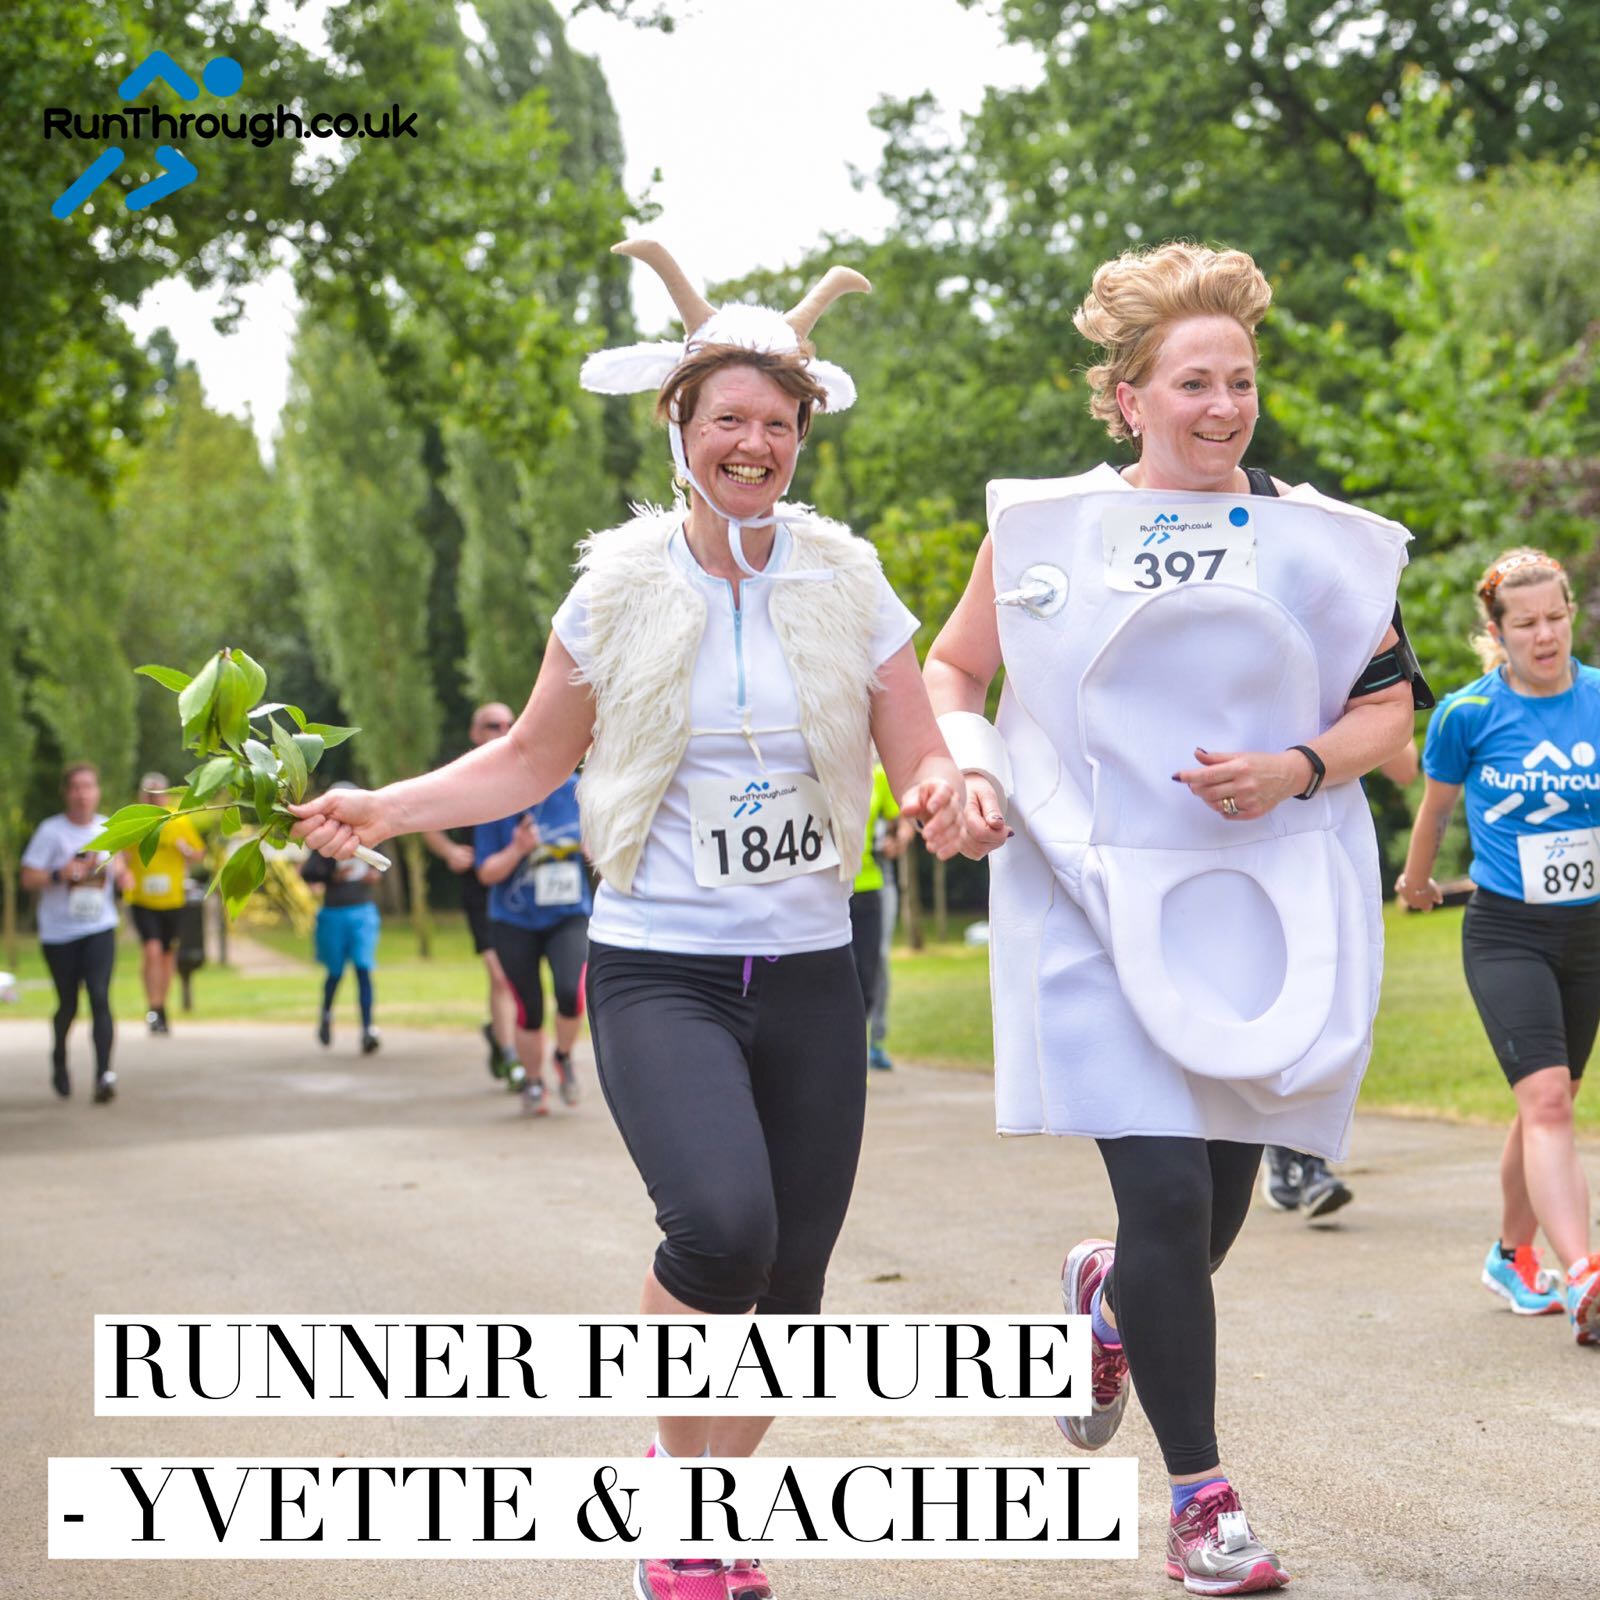 Runner Feature – The Goat & The Toilet